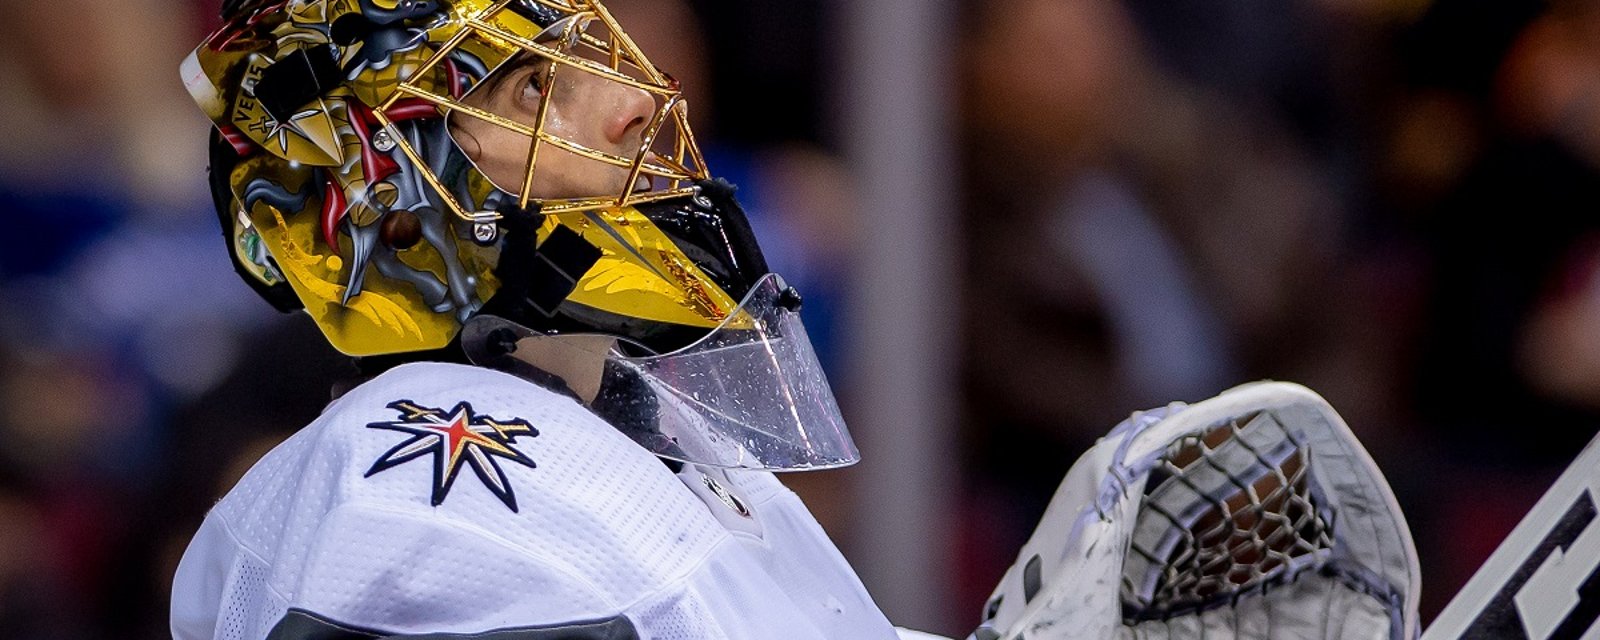 Marc Andre Fleury opens up about the loss of his father, Andre Fleury.